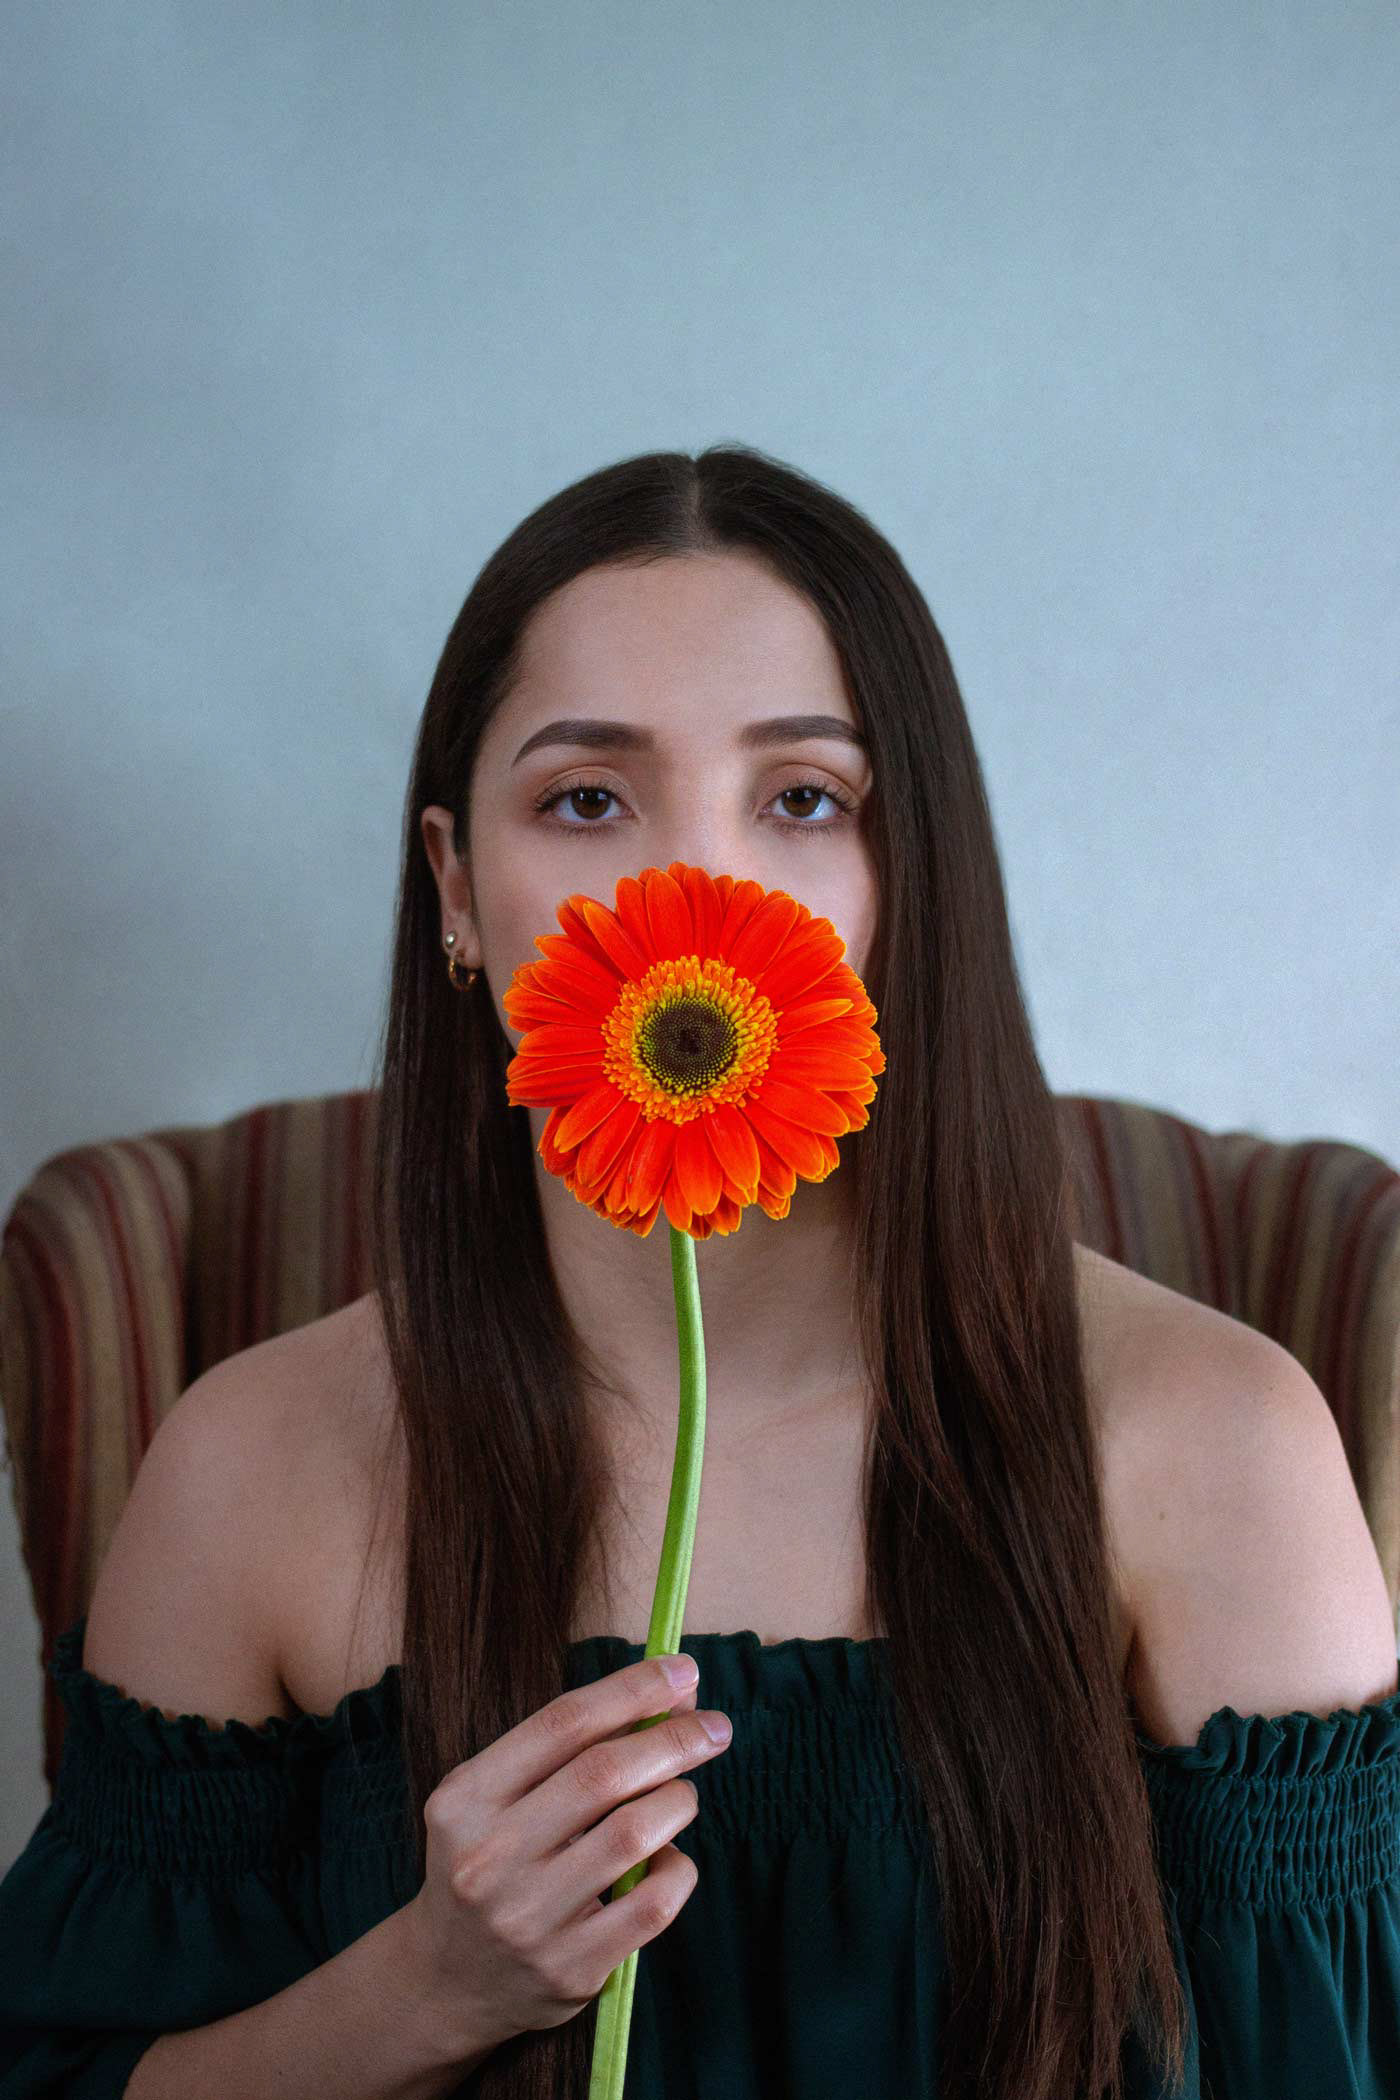 artisticphotography cinematography creativephotography Flowers portrait portrait photography